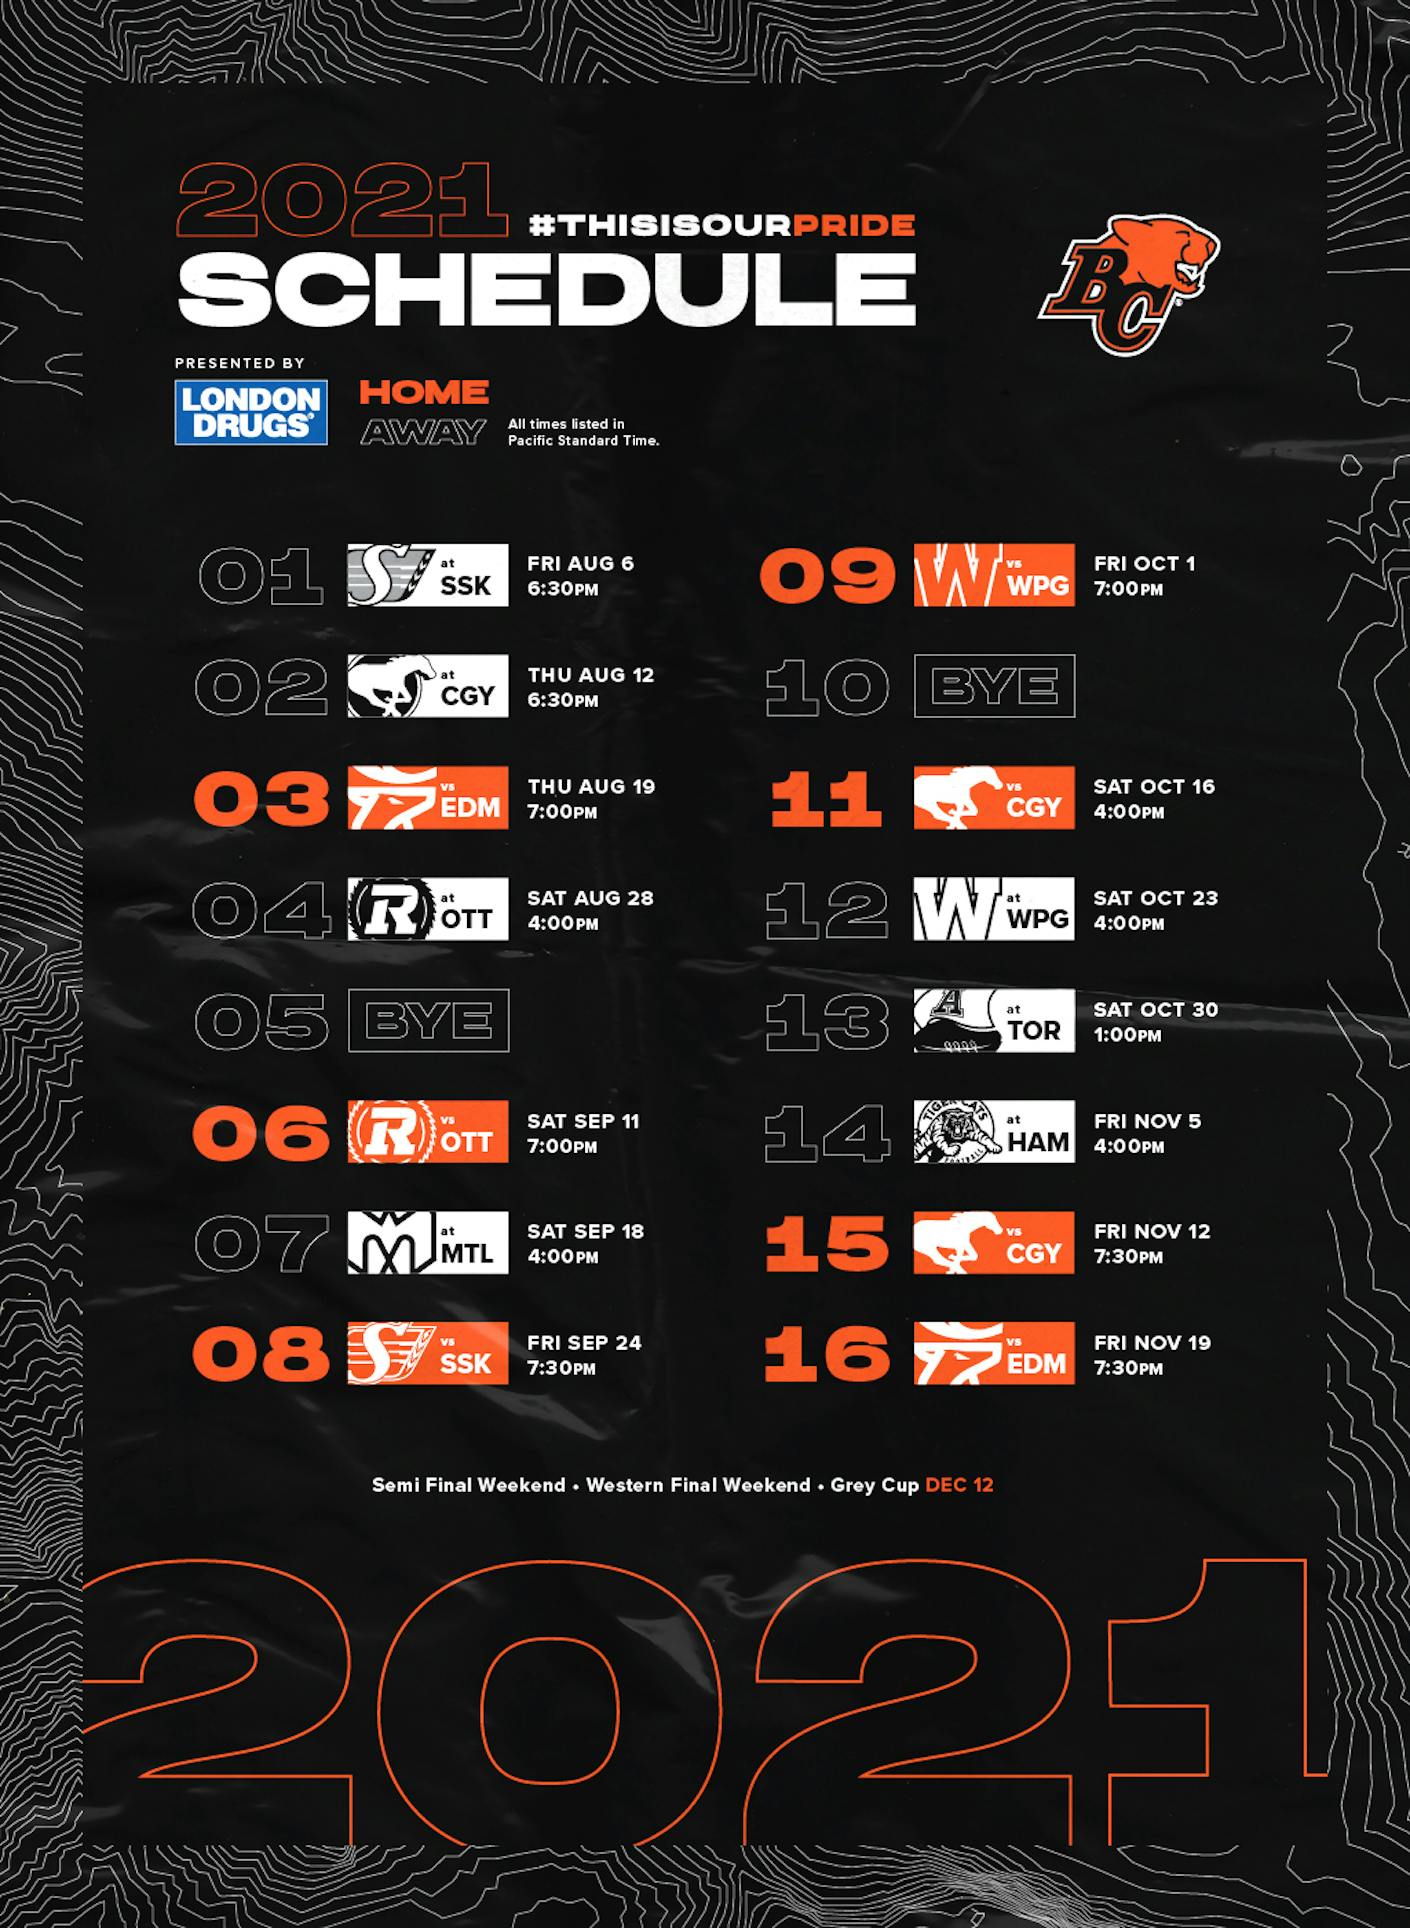 lions schedule this year